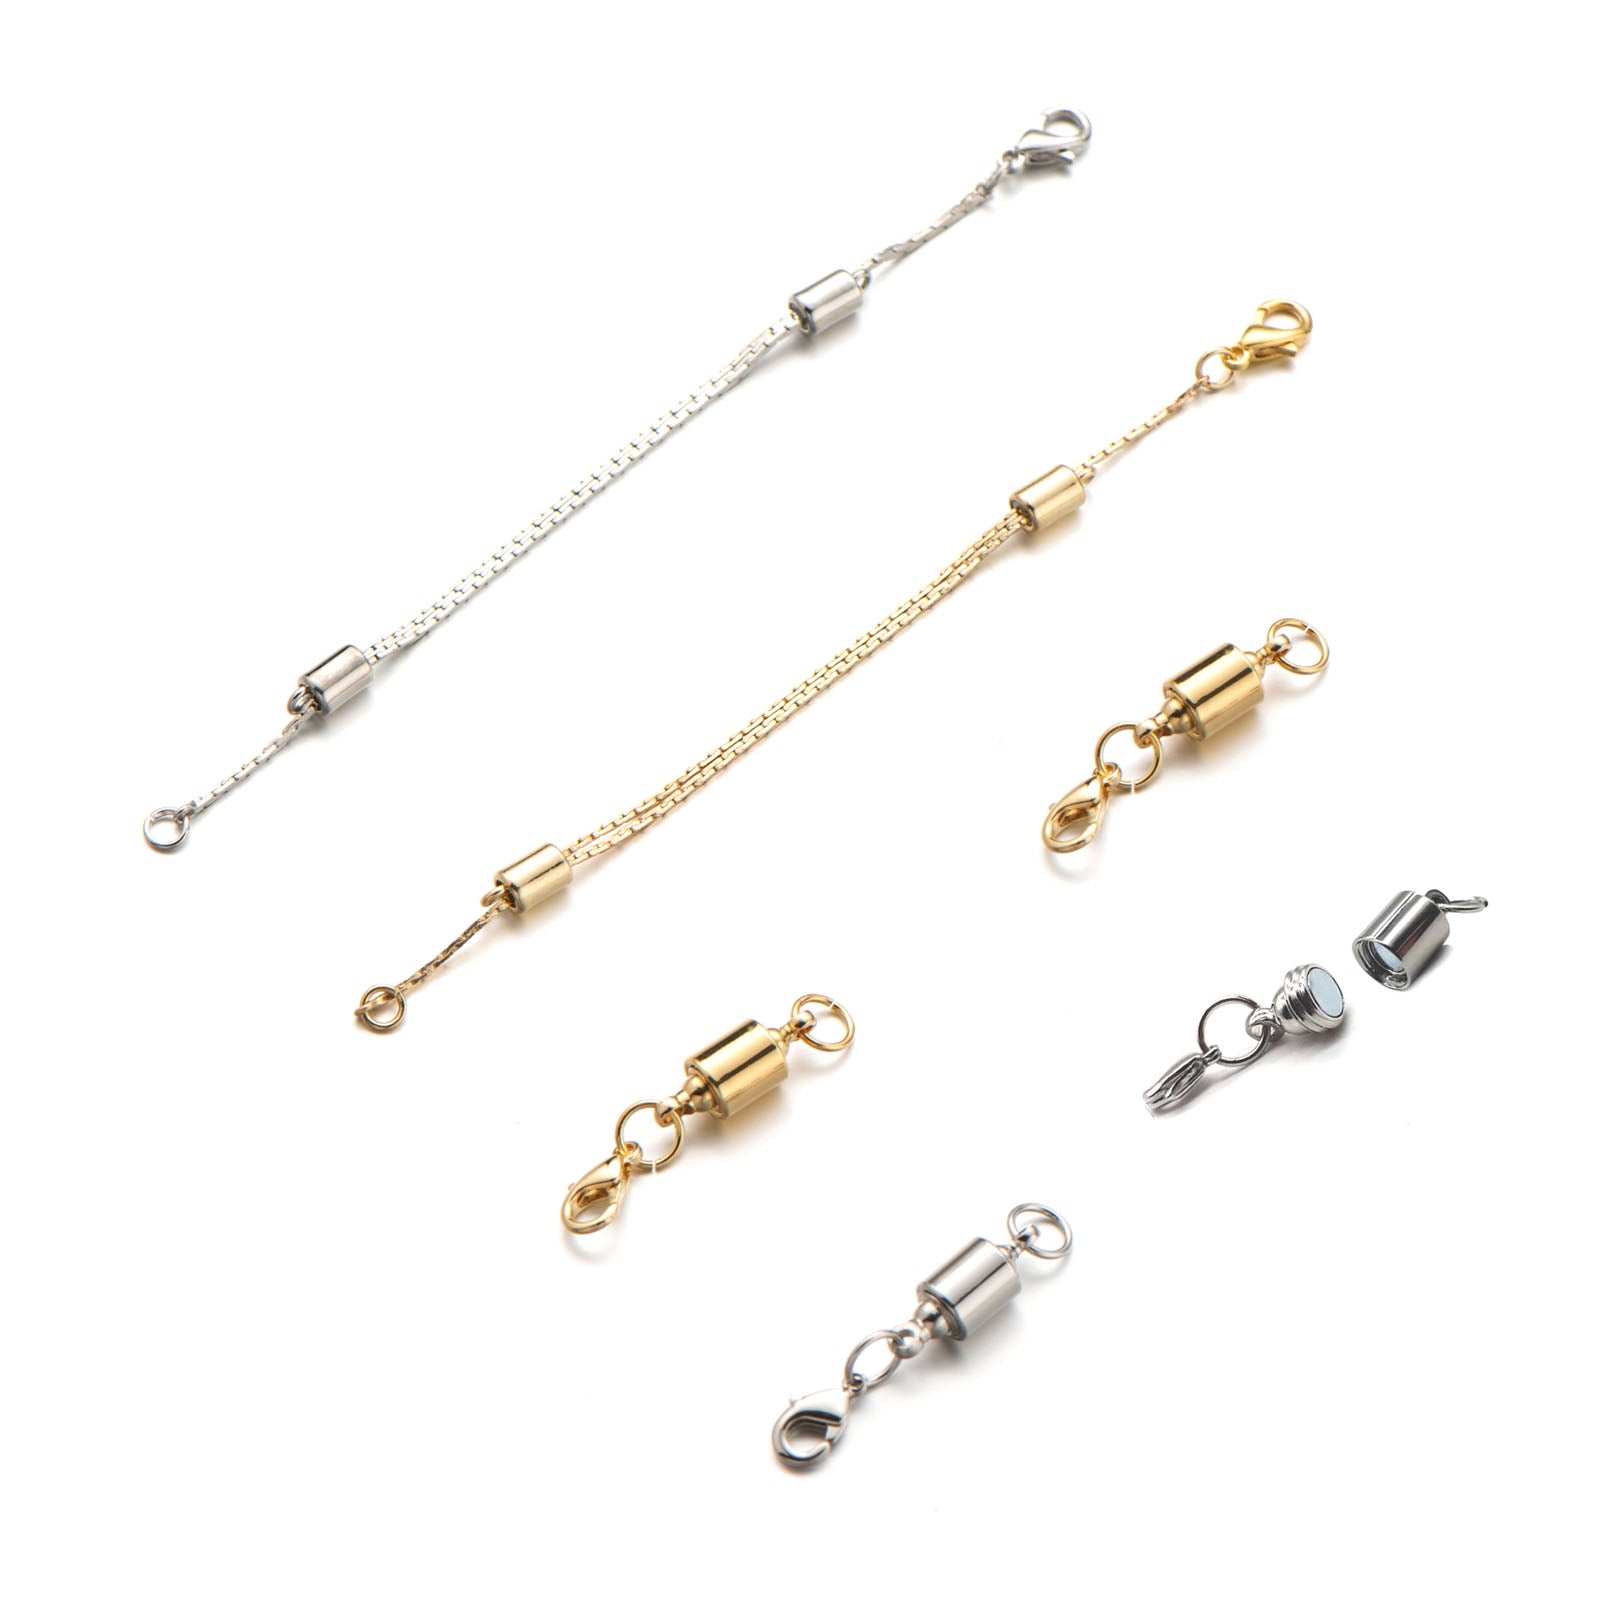 Adjustable Chain Extenders Magnetic Jewelry Clasps for Necklace Bracelet